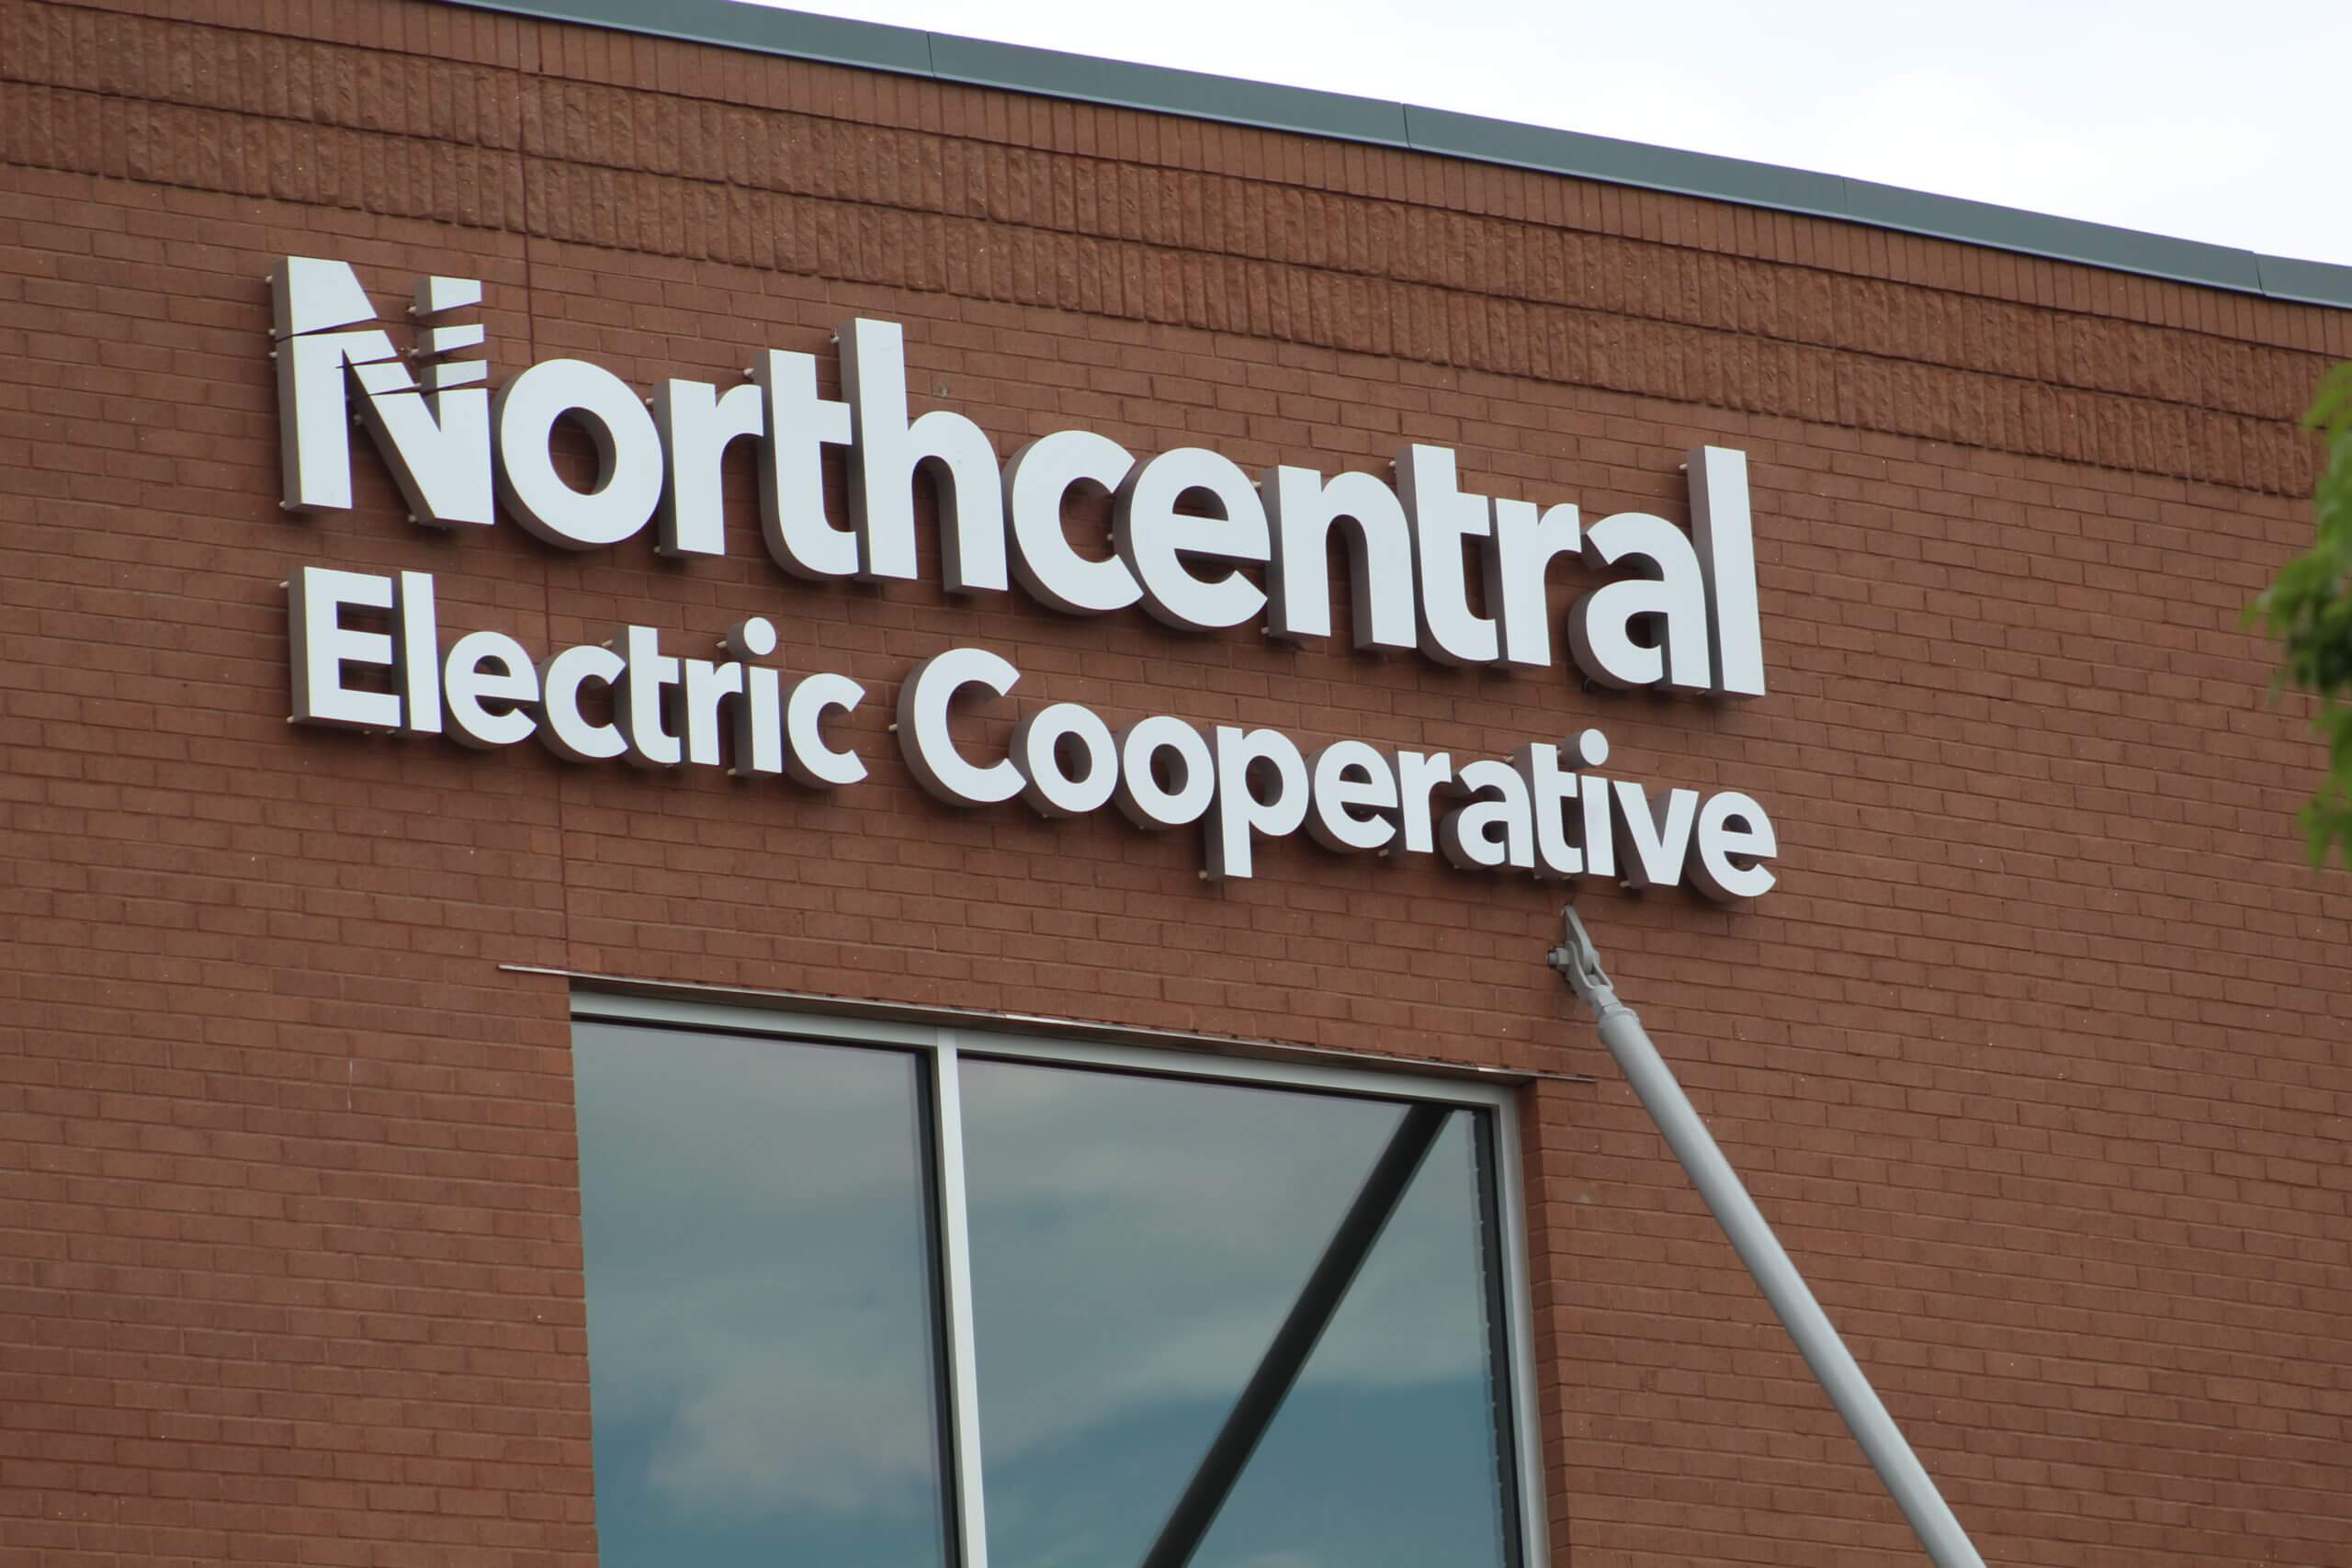 Lower costs mean lower Northcentral power rates